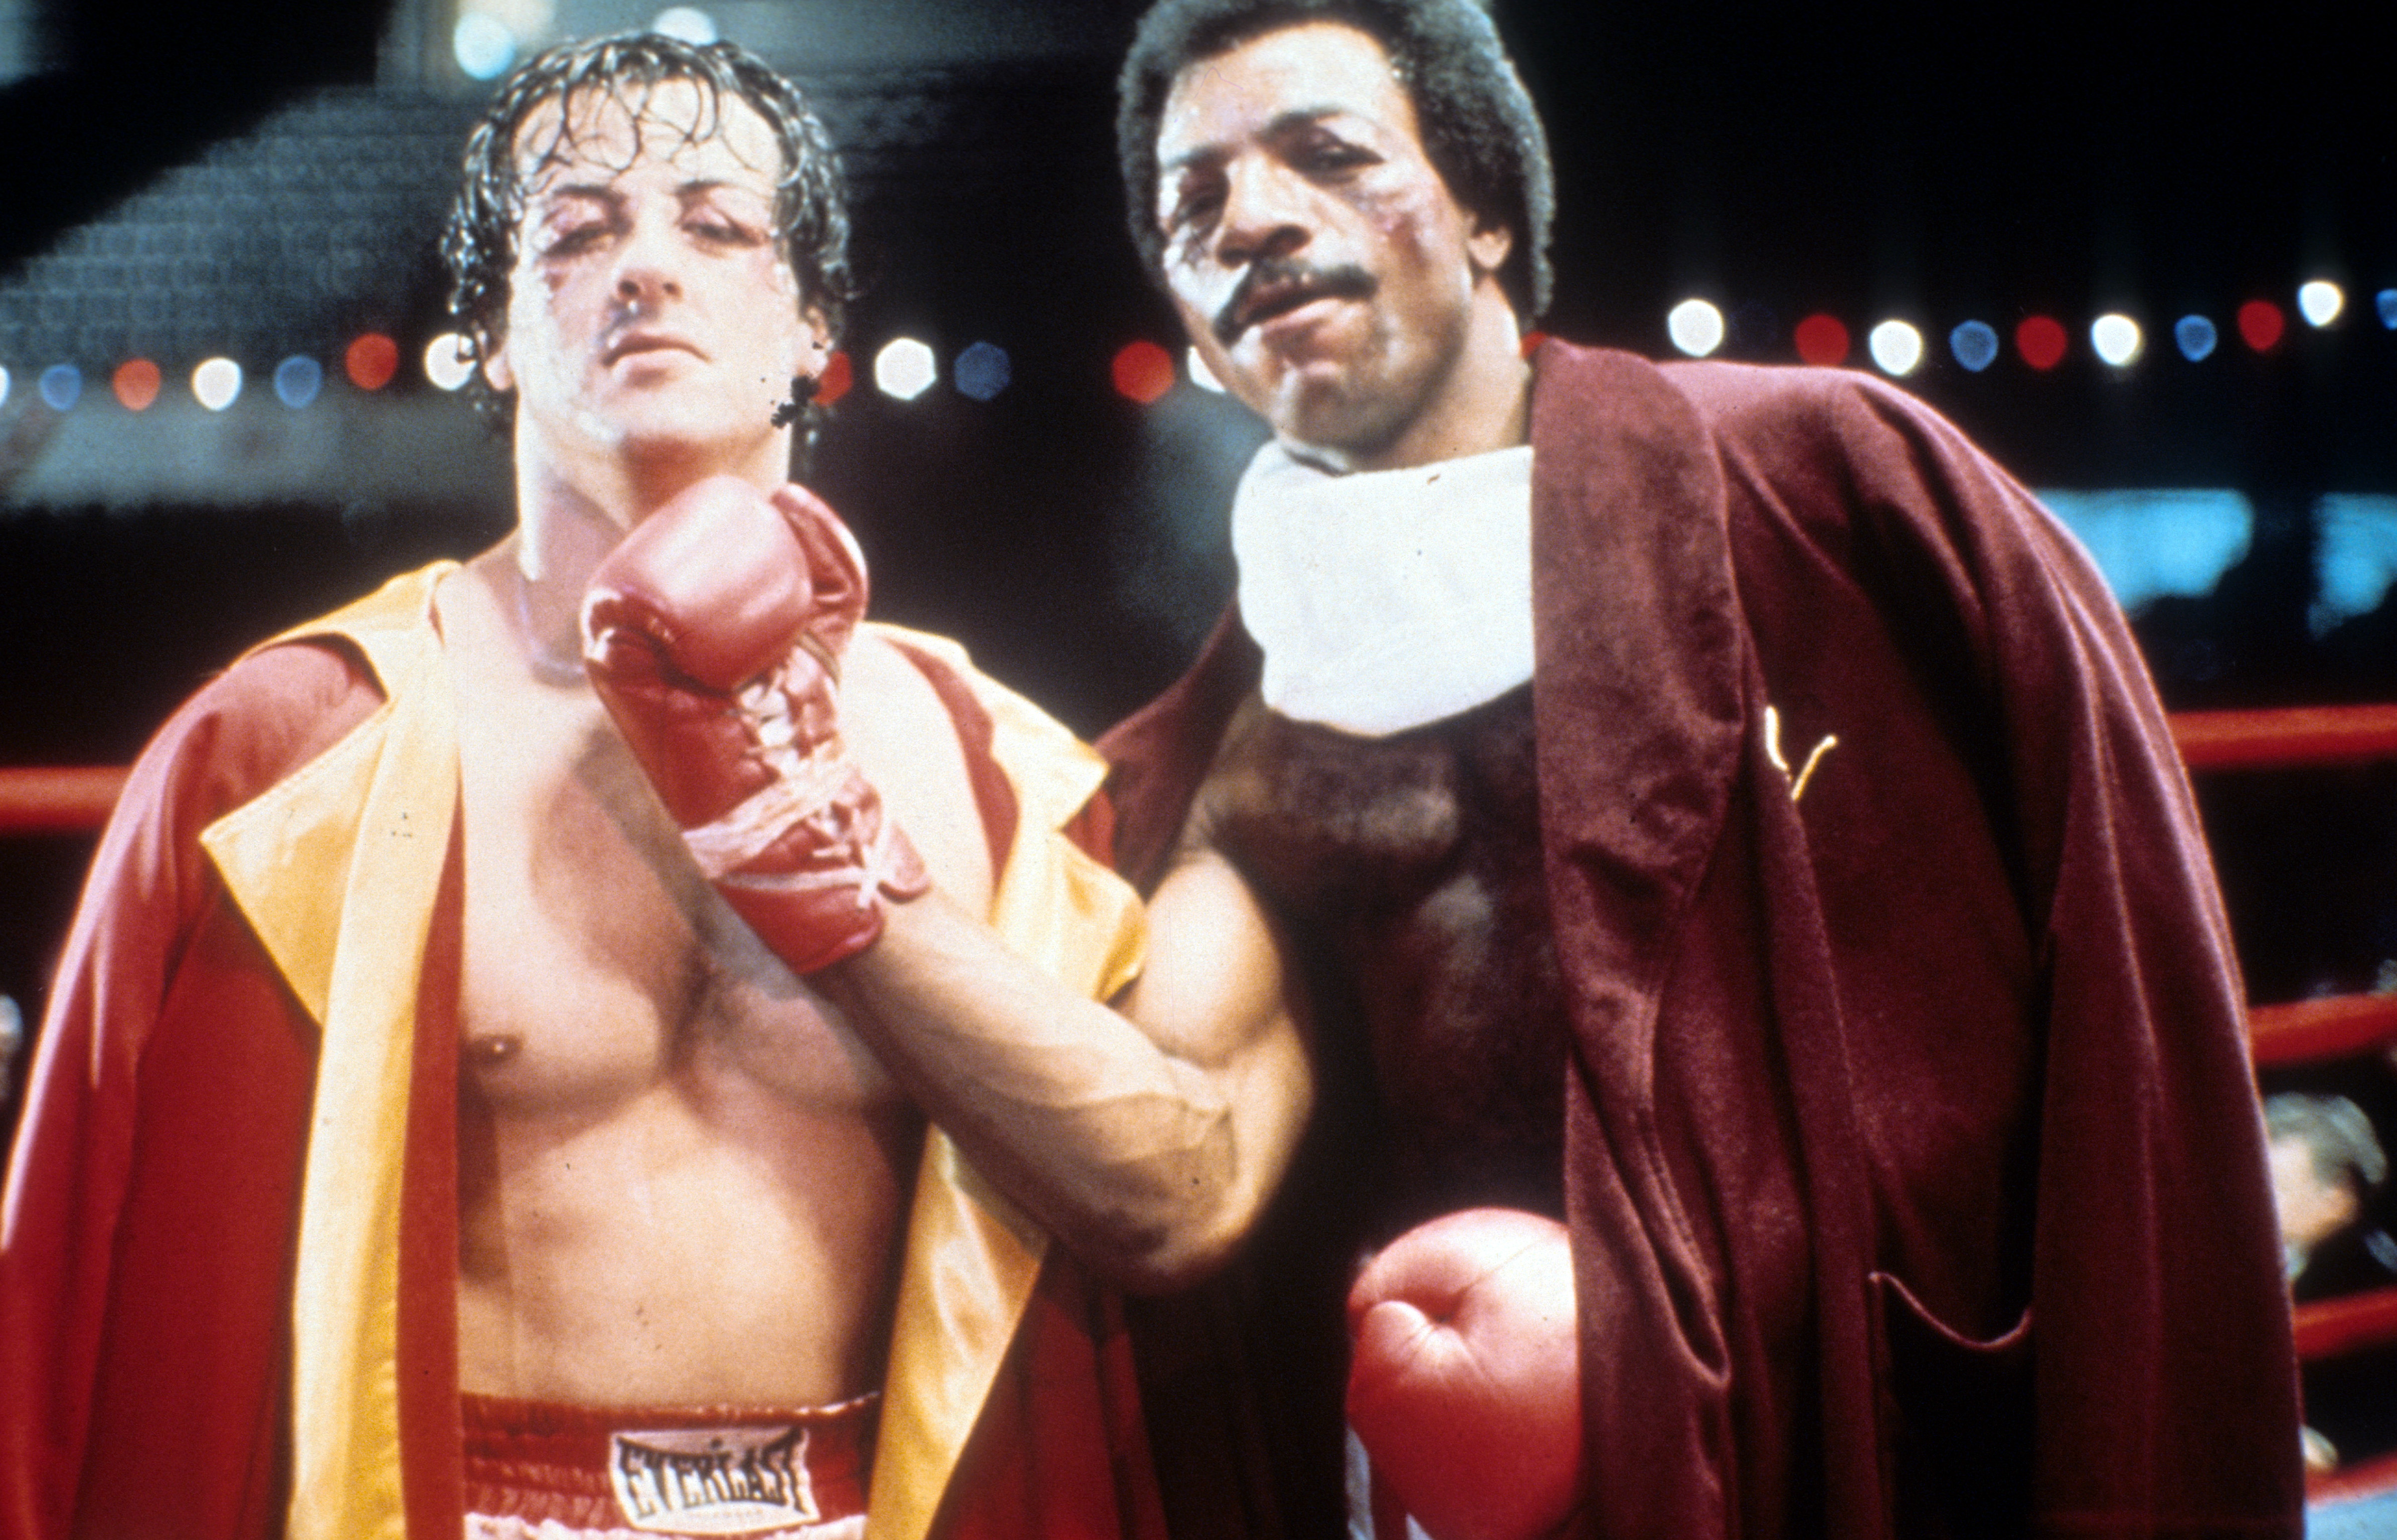 Sylvester Stallone and Carl Weathers on set of the film 'Rocky', 1976 | Source: Getty Images